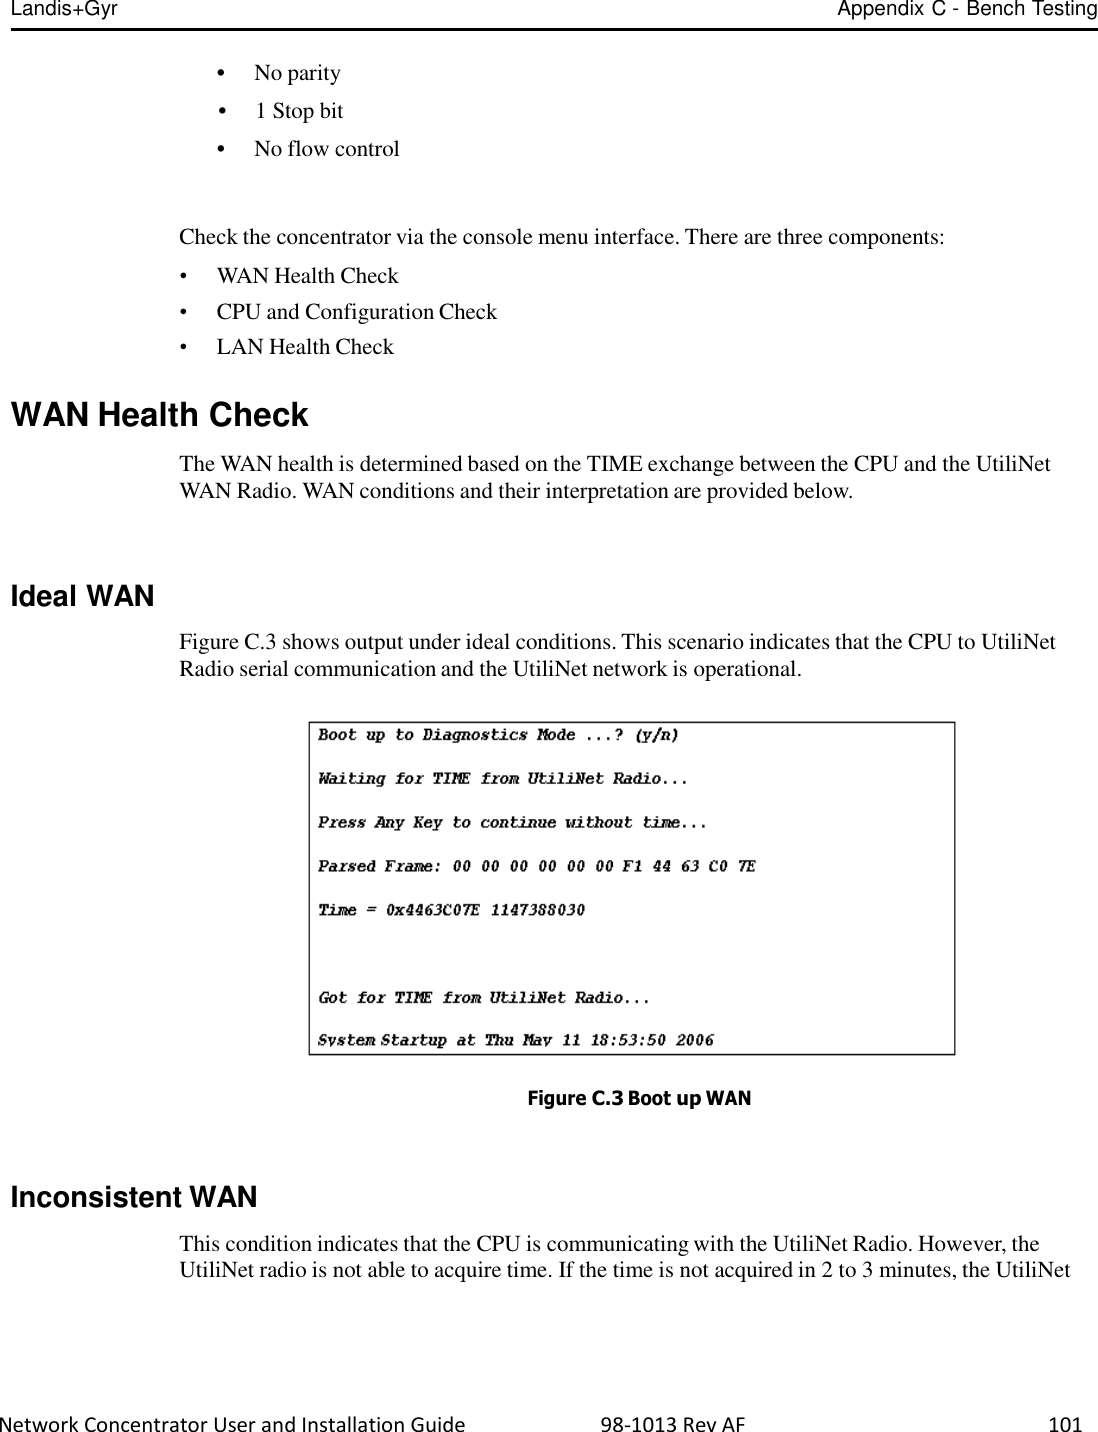 Landis+Gyr Appendix C - Bench Testing  Network Concentrator User and Installation Guide                          98-1013 Rev AF    101   • No parity  • 1 Stop bit  • No flow control    Check the concentrator via the console menu interface. There are three components:  •  WAN Health Check •  CPU and Configuration Check •  LAN Health Check   WAN Health Check  The WAN health is determined based on the TIME exchange between the CPU and the UtiliNet WAN Radio. WAN conditions and their interpretation are provided below.     Ideal WAN    Figure C.3 shows output under ideal conditions. This scenario indicates that the CPU to UtiliNet Radio serial communication and the UtiliNet network is operational.     Figure C.3 Boot up WAN    Inconsistent WAN  This condition indicates that the CPU is communicating with the UtiliNet Radio. However, the UtiliNet radio is not able to acquire time. If the time is not acquired in 2 to 3 minutes, the UtiliNet 